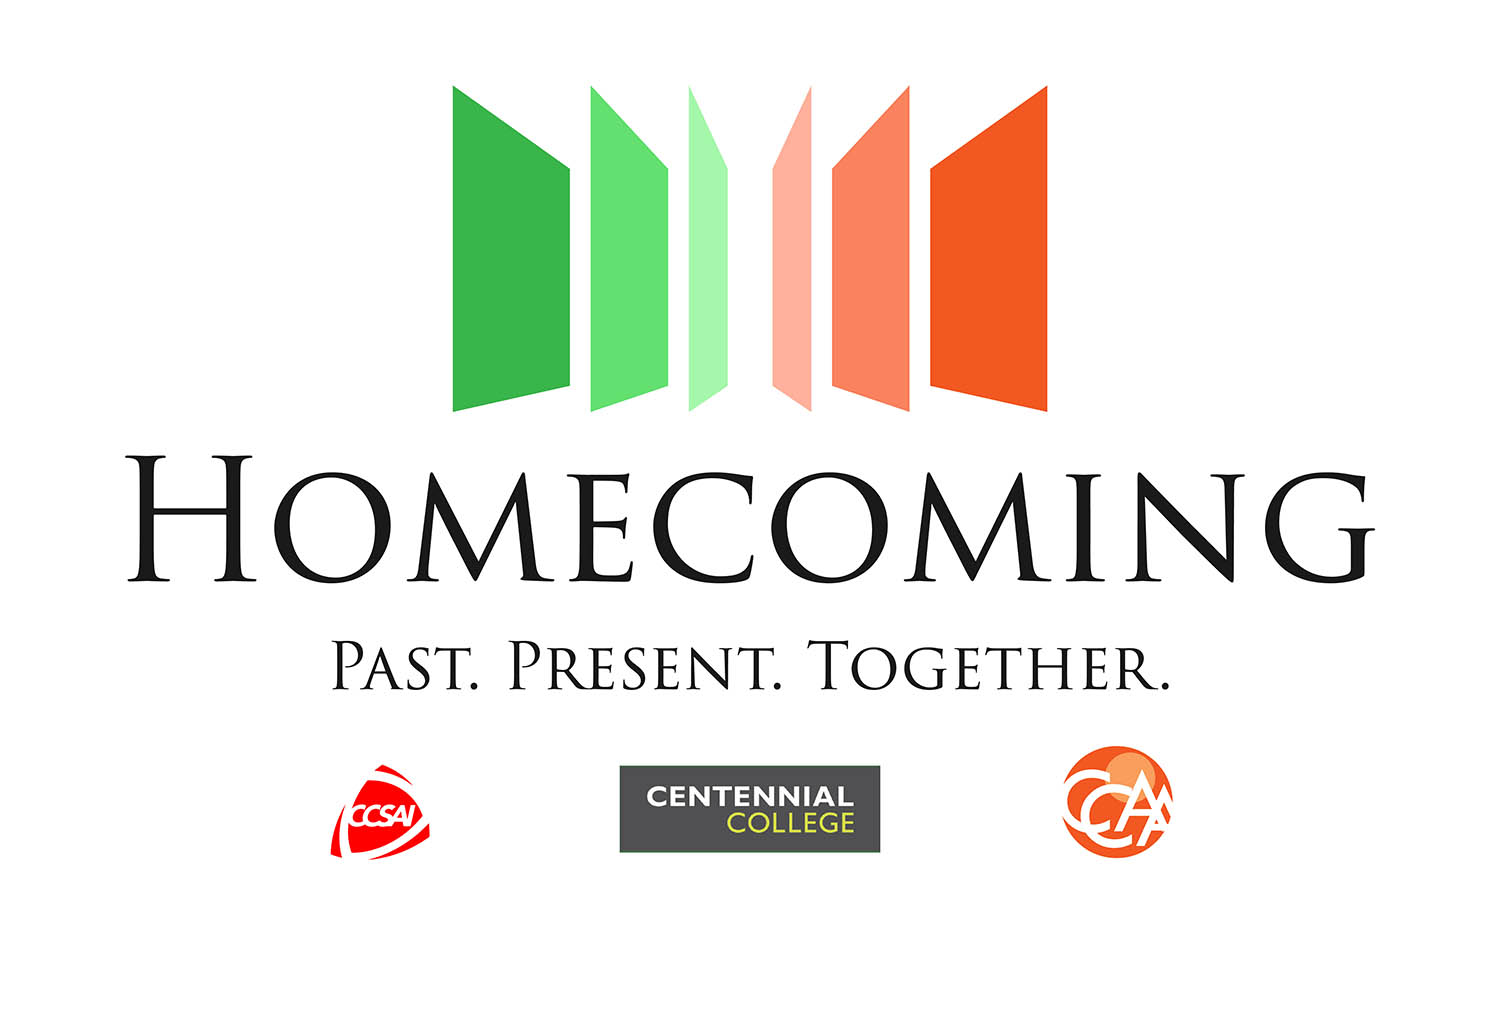 The logo for the Homecoming 2018 logo with three logos